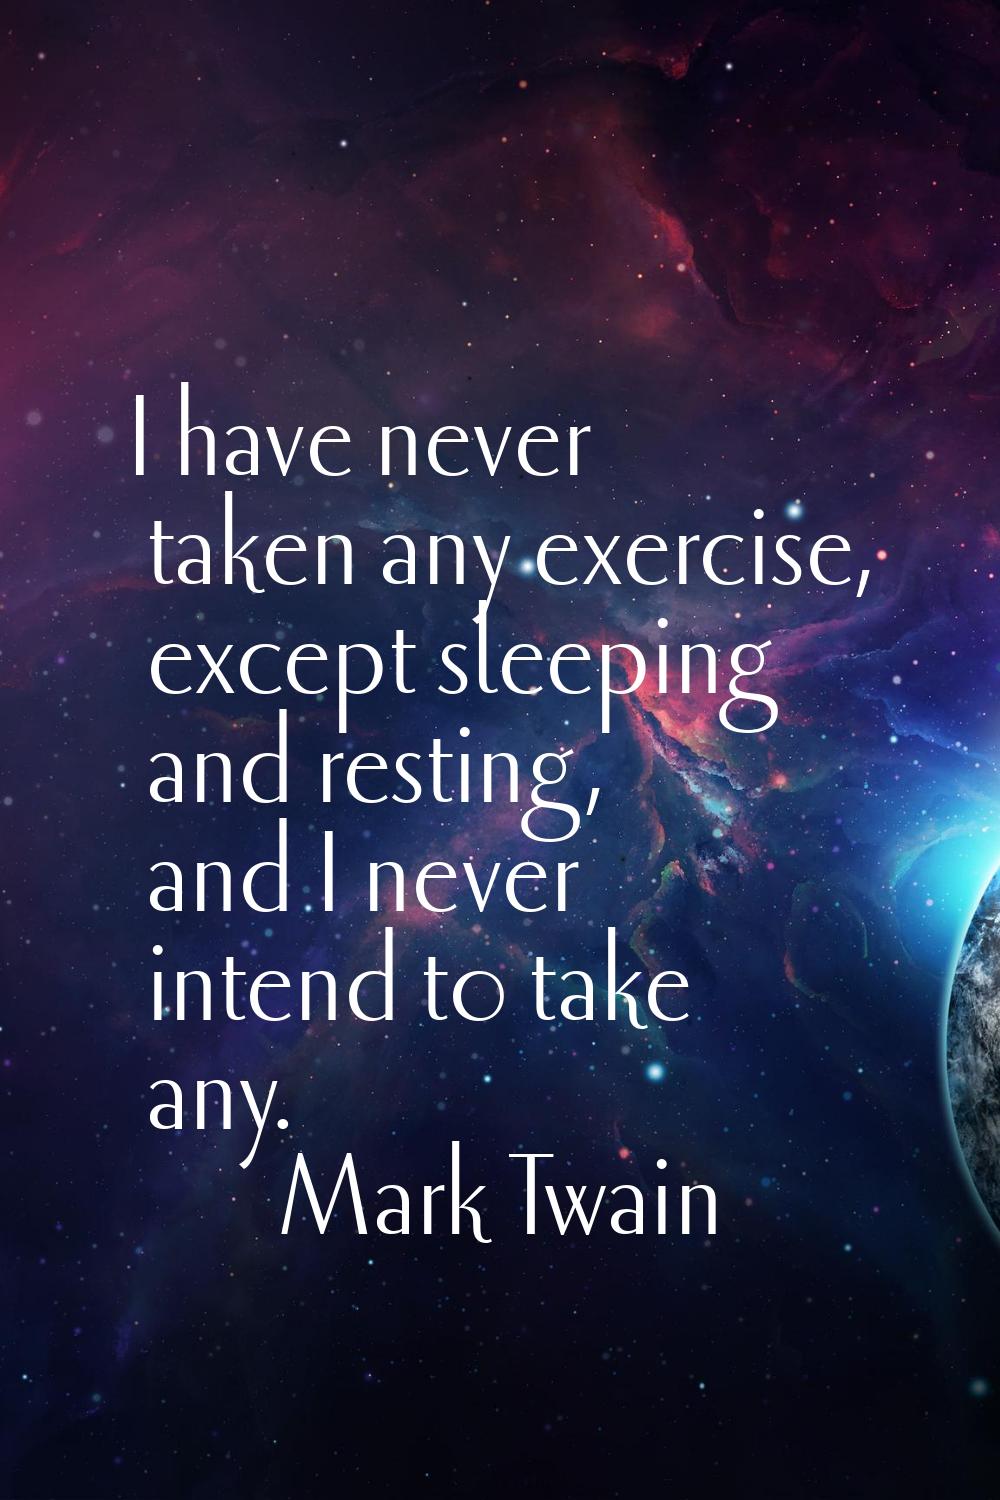 I have never taken any exercise, except sleeping and resting, and I never intend to take any.